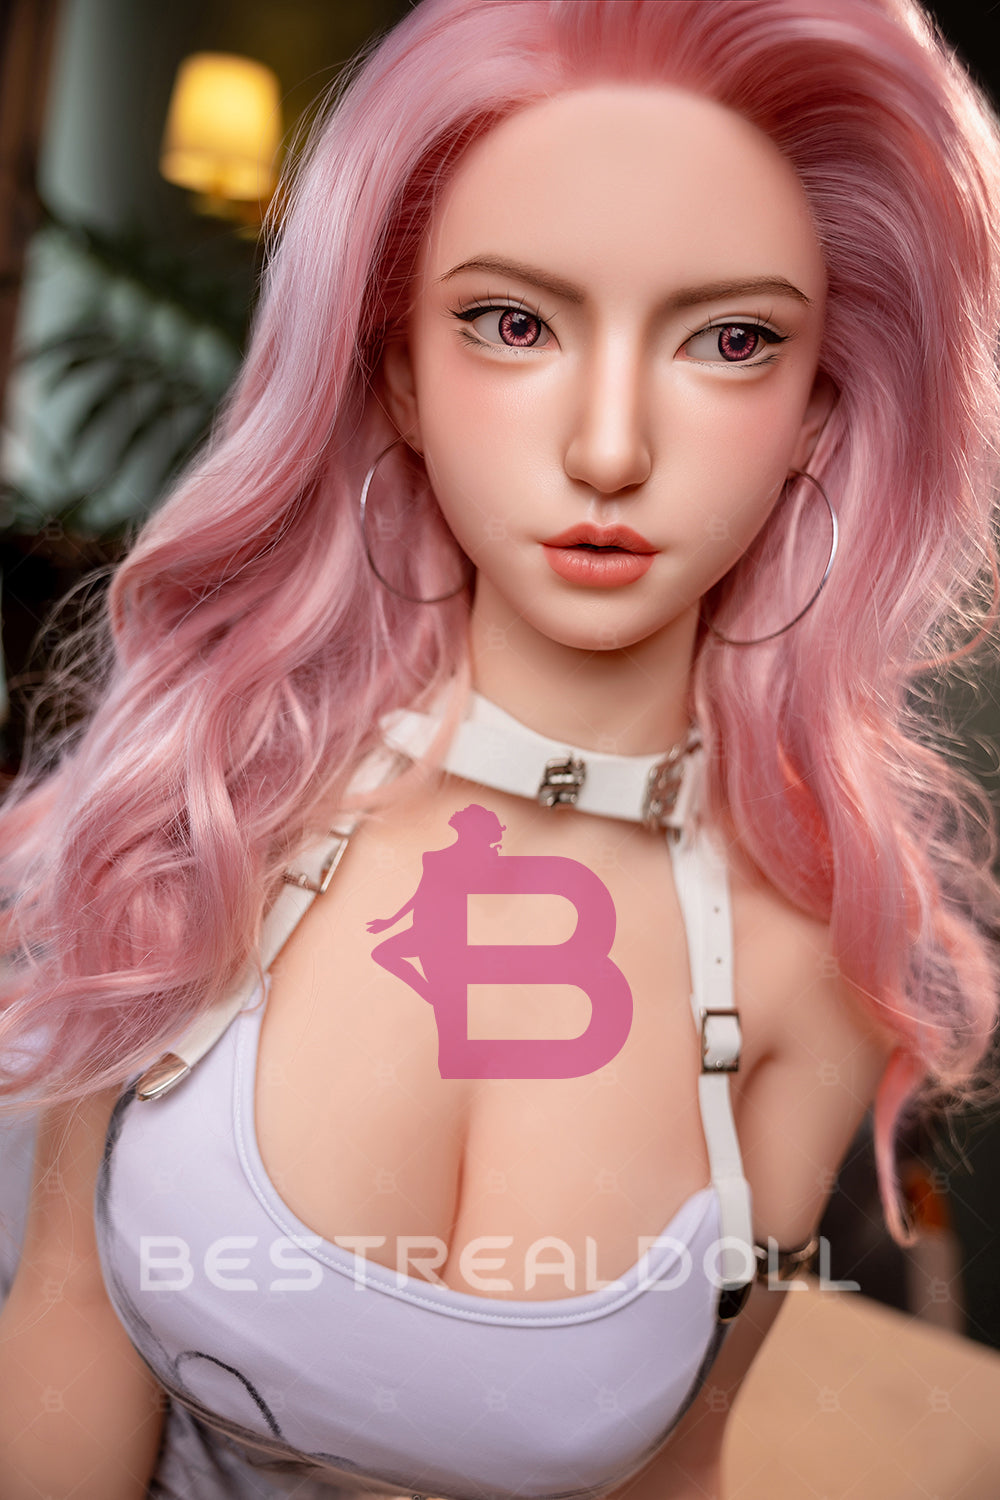 US Stock - YAMIEE Rylee 163cm Unique Design Silicone Head Blowjob Sex Doll TPE Body Adult Oral Sex Love Doll